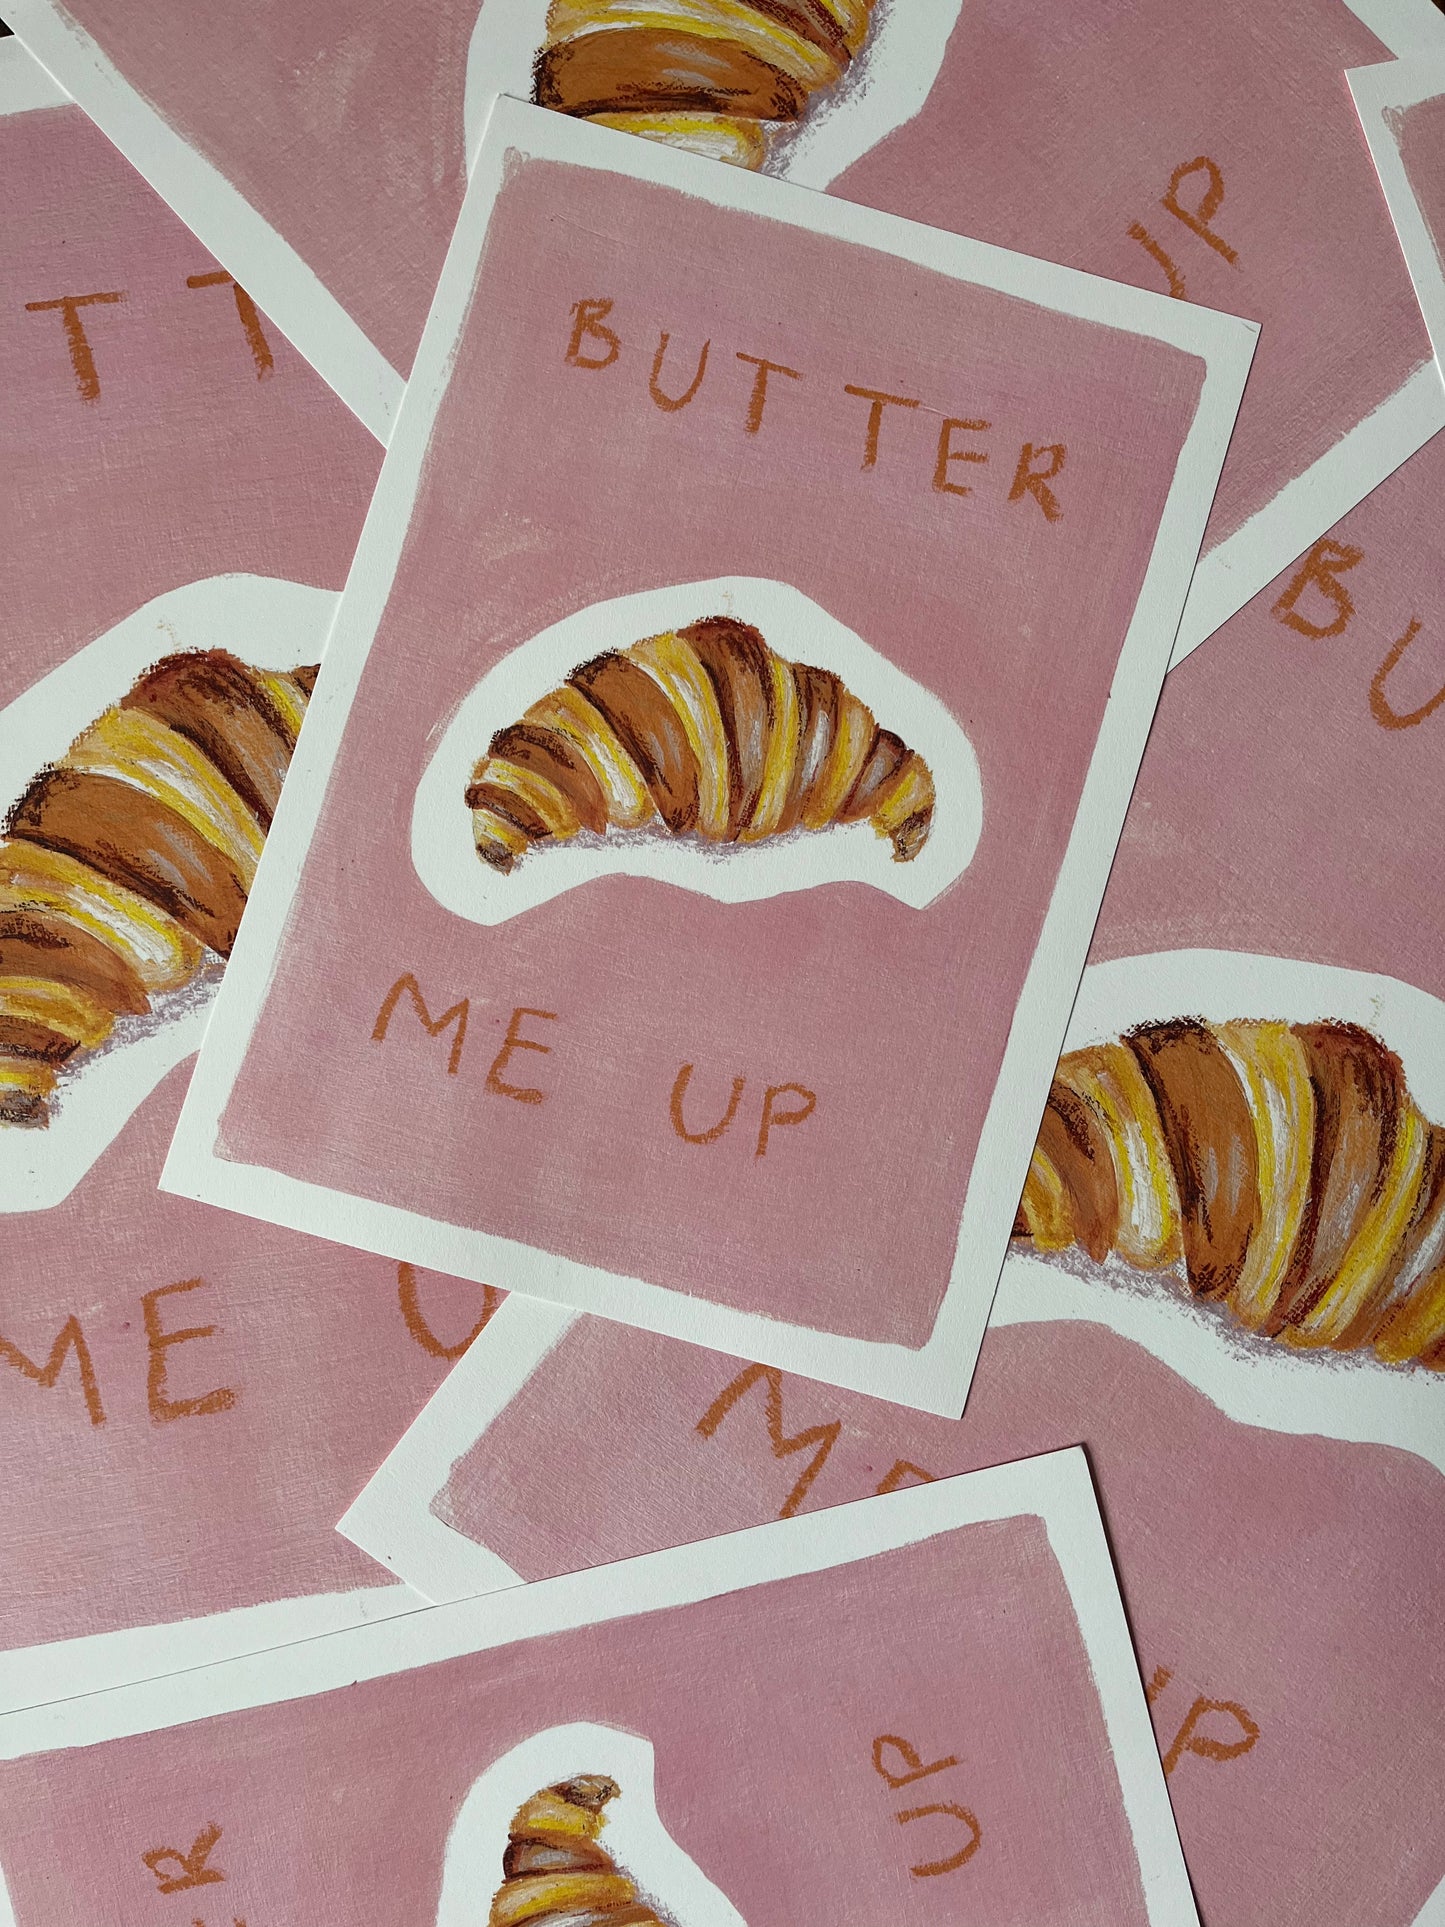 Butter Me Up print